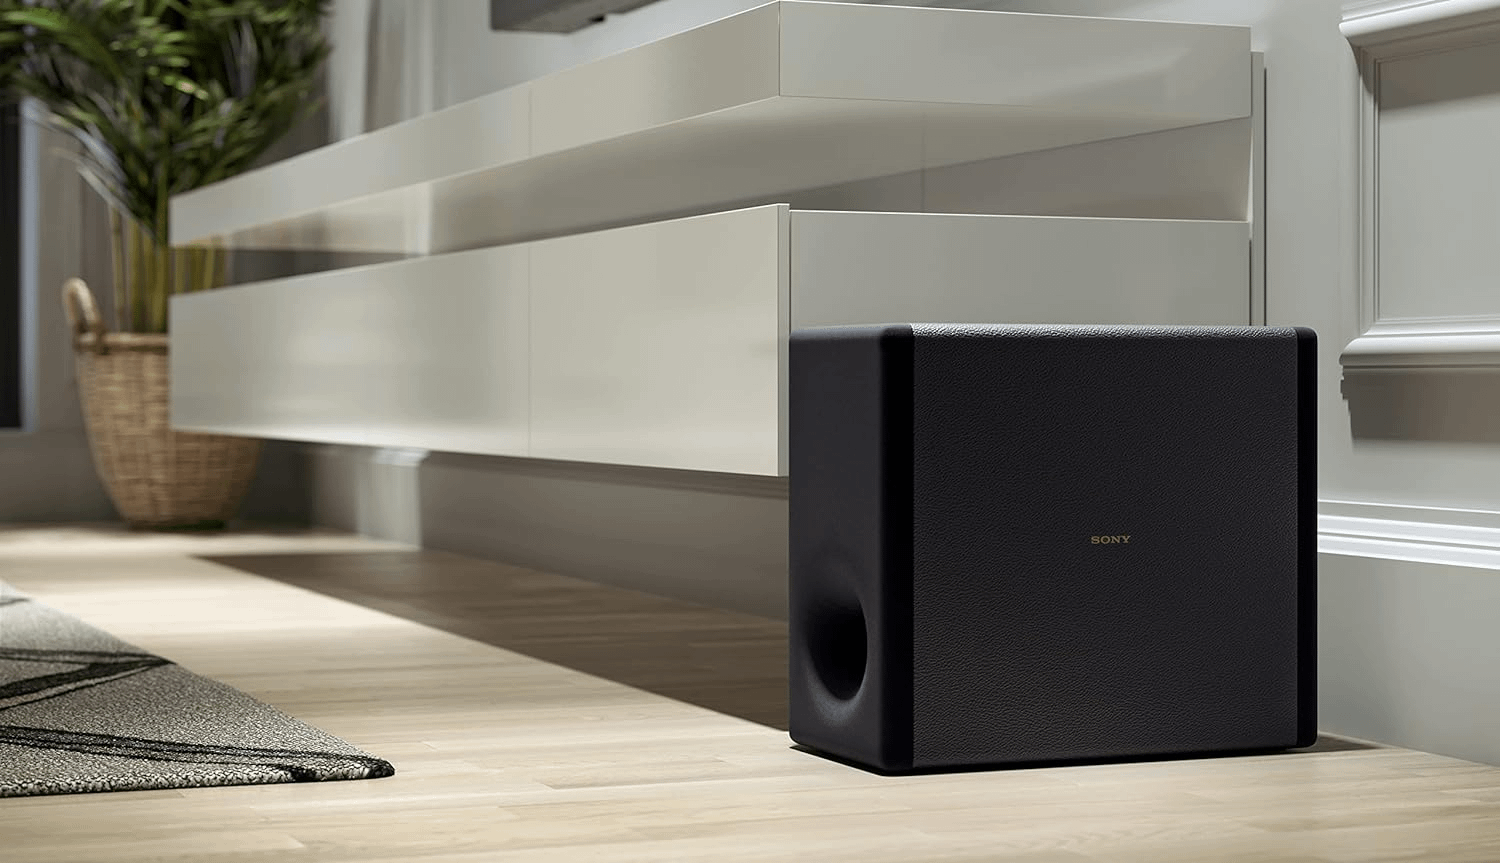 Subwoofer Deals You Don't Want to Miss! Save Up to 55% on Polk Audio, Klipsch, Jamo, and more!